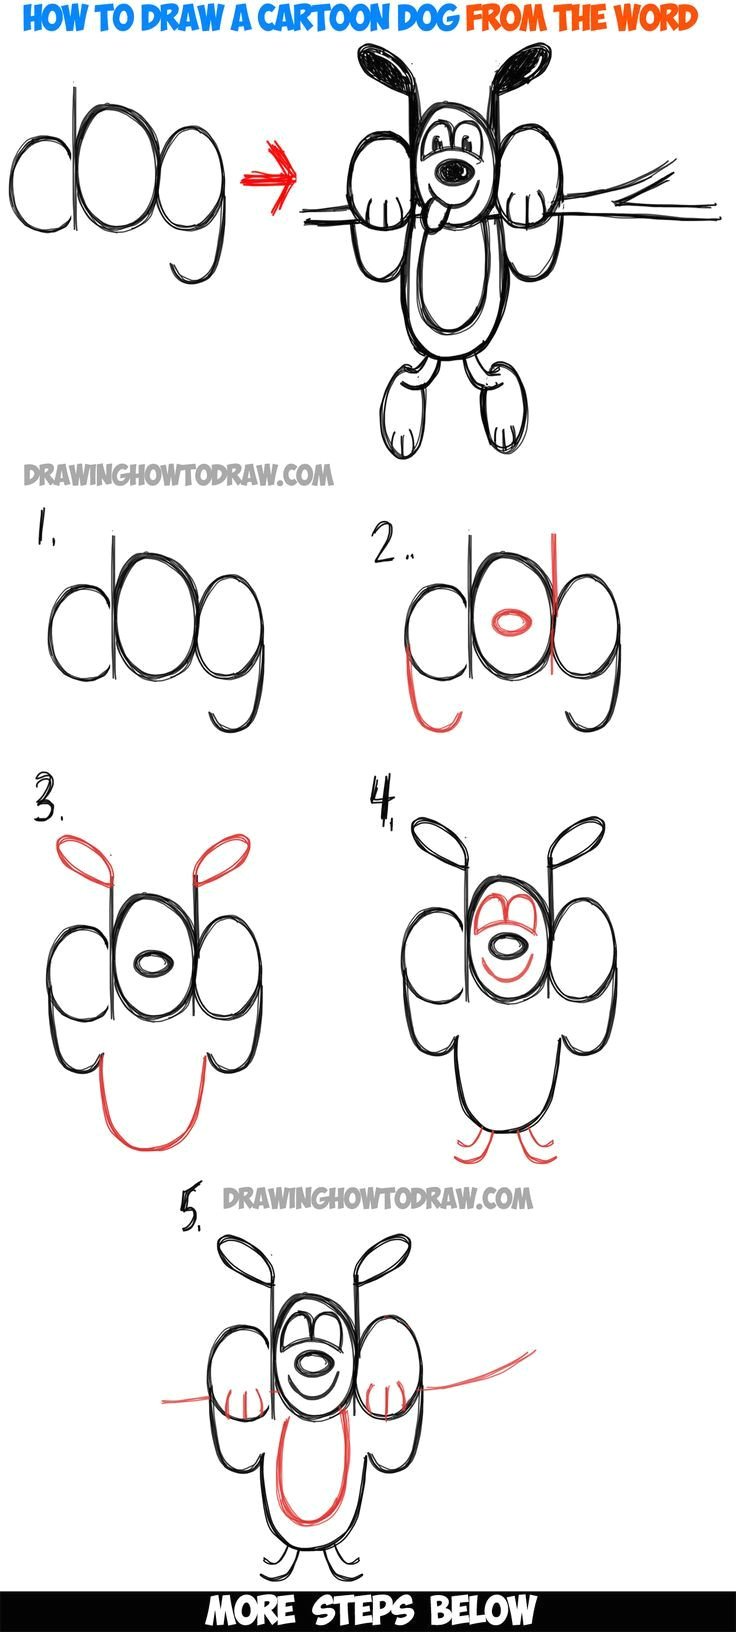 Cartoon Drawing Very Easy How to Draw A Cartoon Dog Hanging Out From the Word Dog Easy